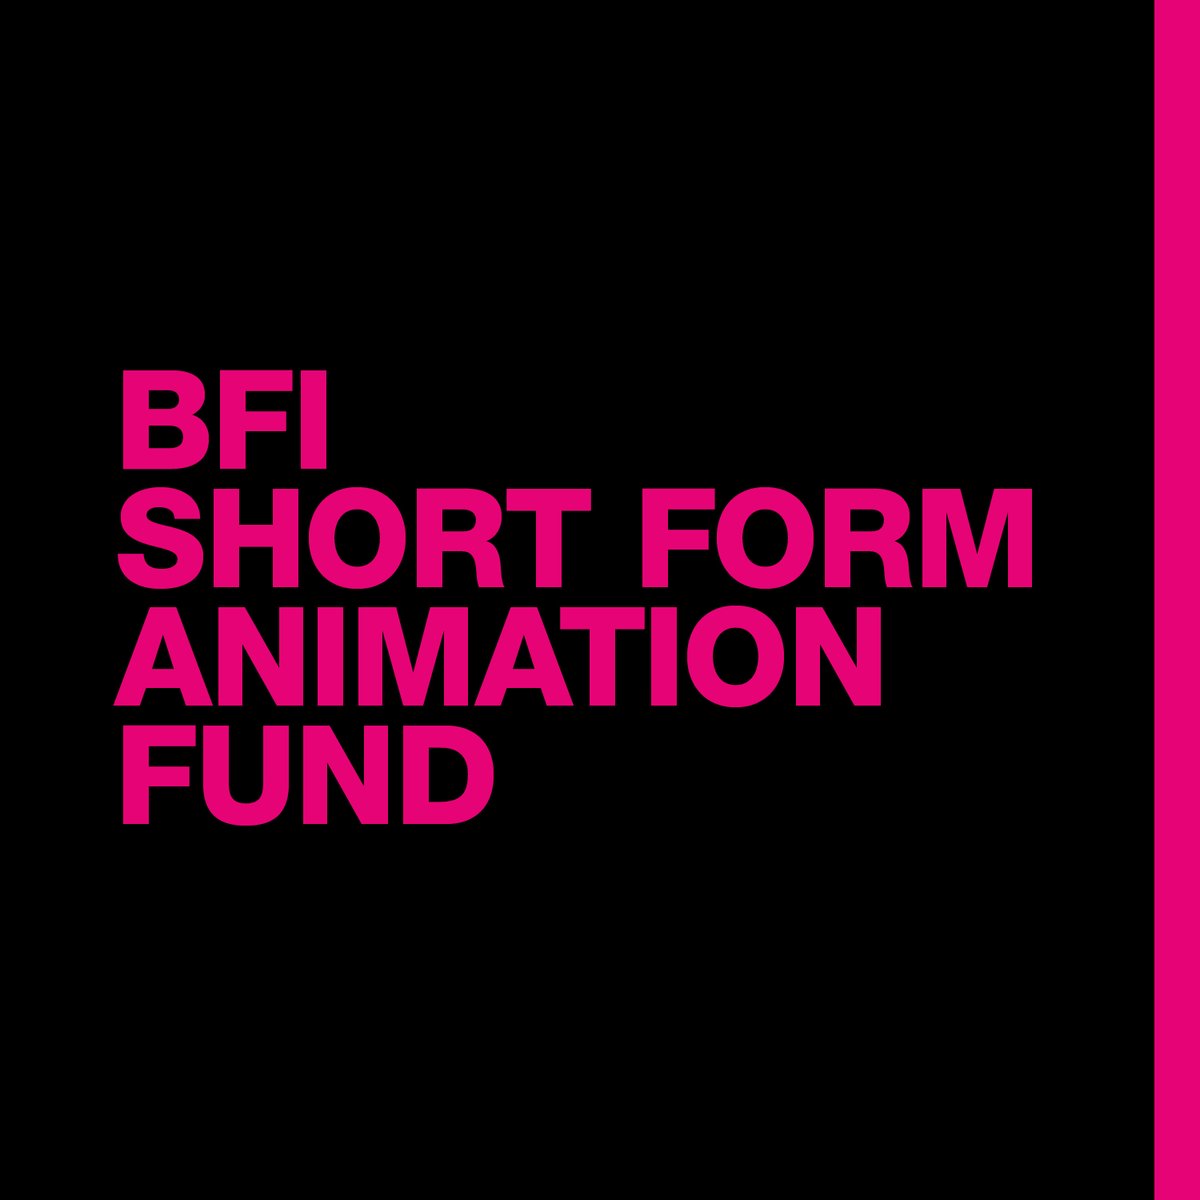 Animators! The BFI Short Form Animation Fund opens on 7 May

Supporting narrative short form projects in any animated technique or genre, made by UK-based teams. Applications close on Tue 9 Jul. theb.fi/44jYWg7

#NationalLottery funded